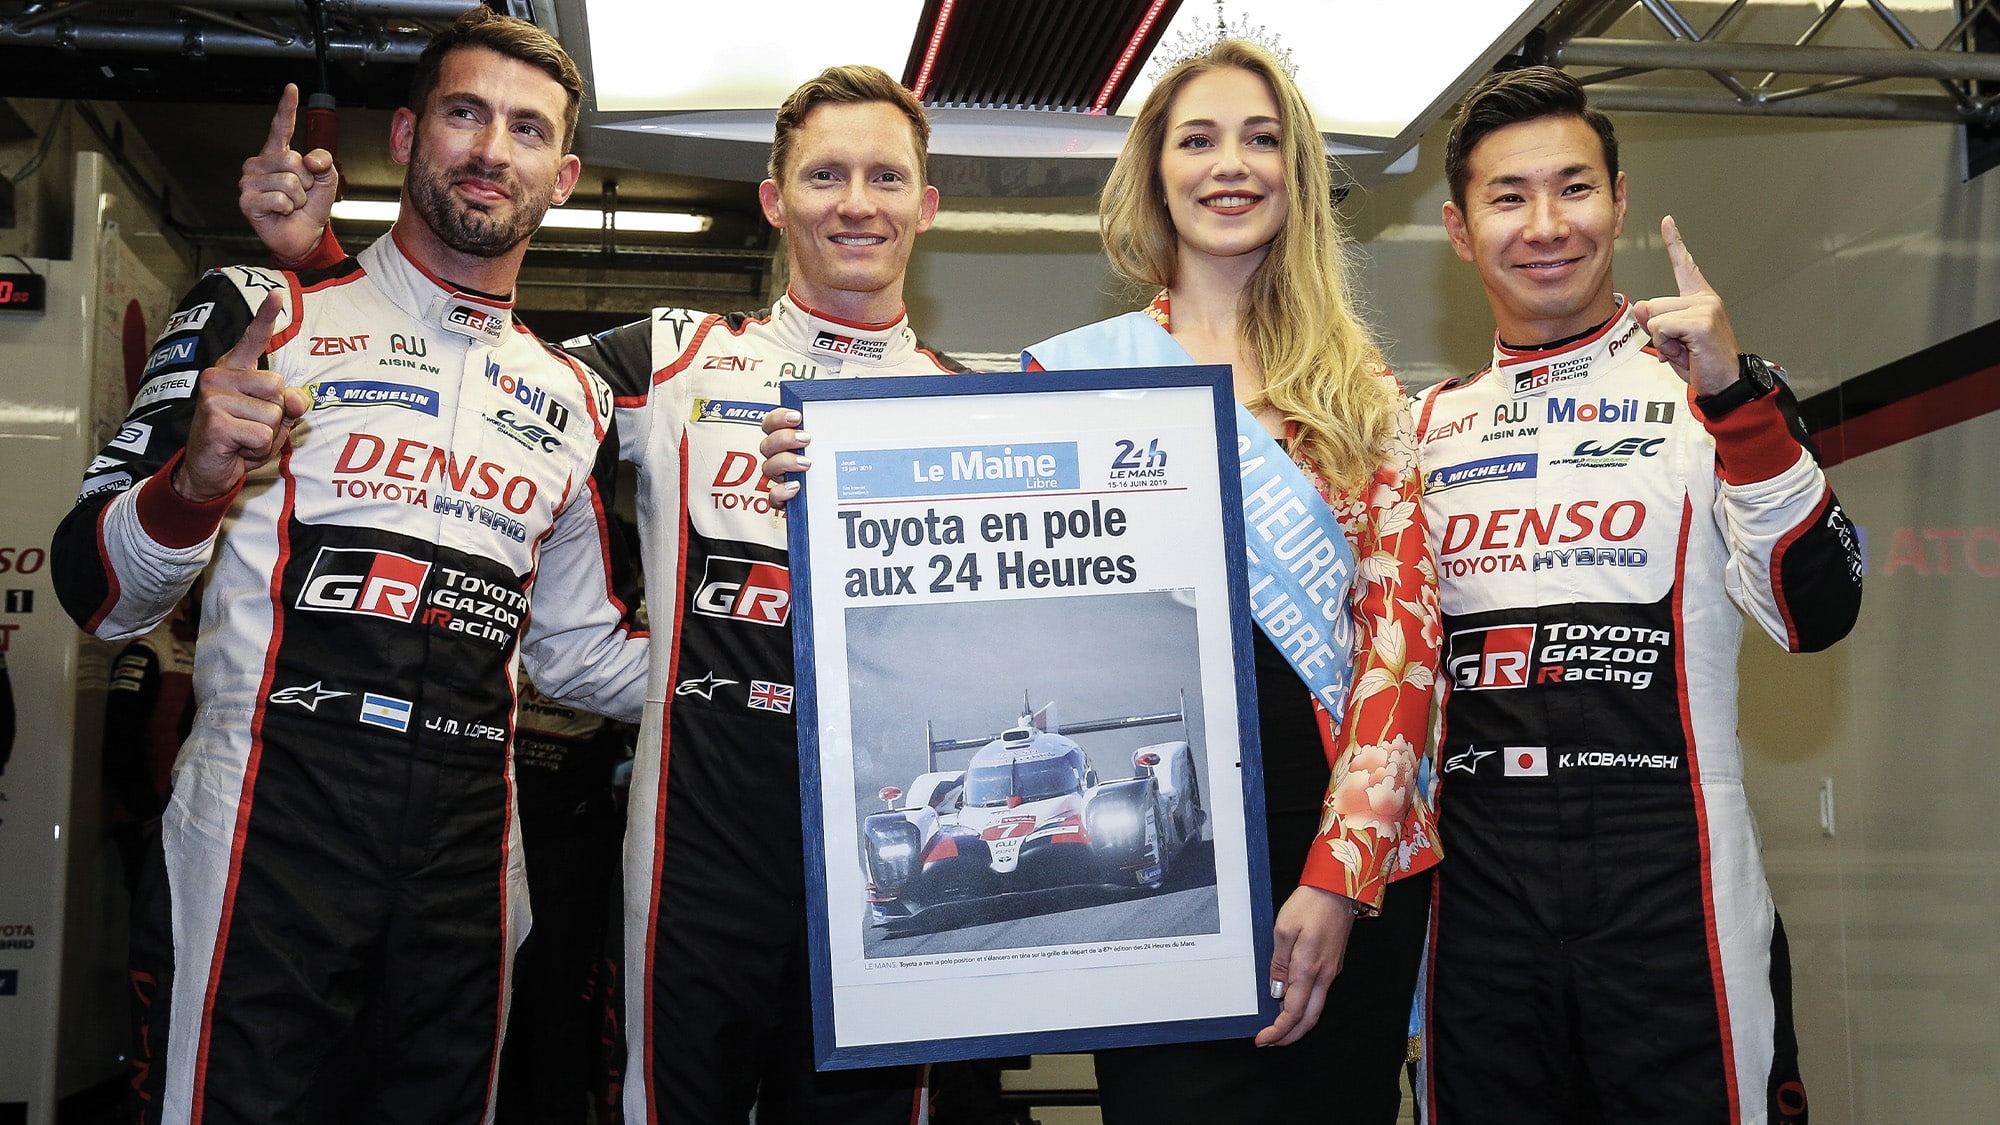 Toyota car 7 drivers celebrate clinching pole position for the 2019 Le Mans 24 Hours